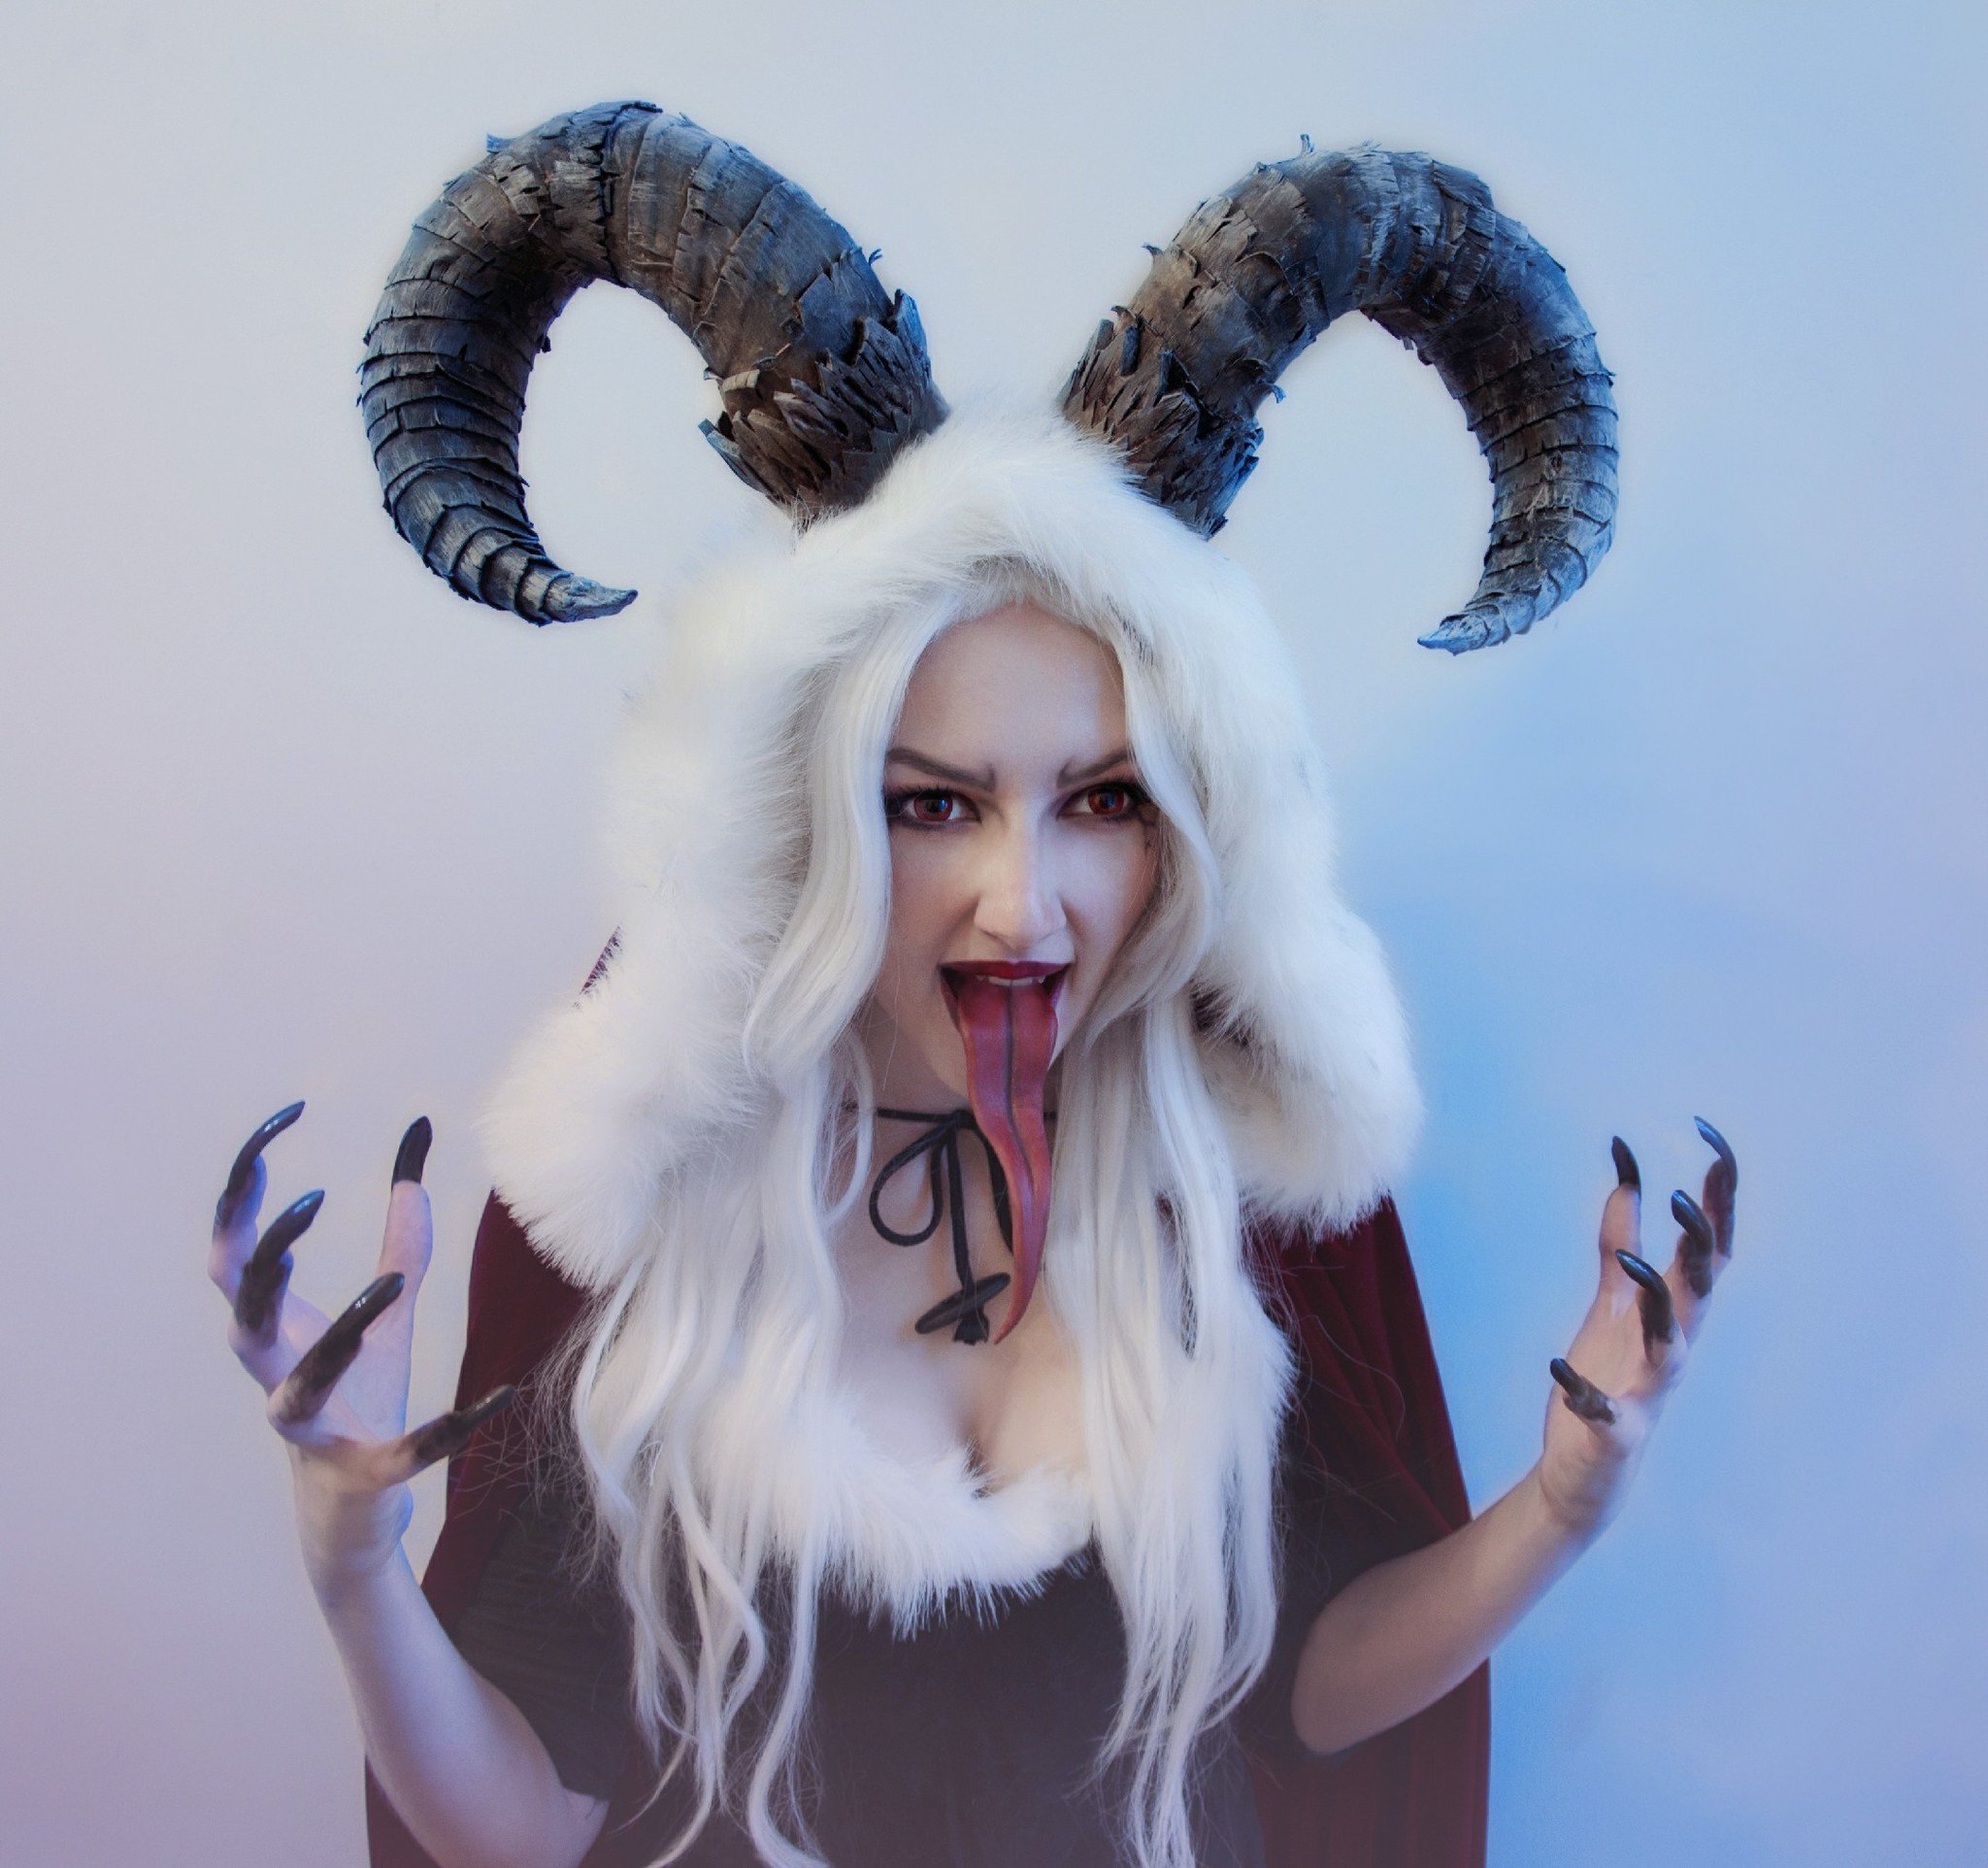 “Lady Krampus is coming!✨
Costest of my favourite festive character...